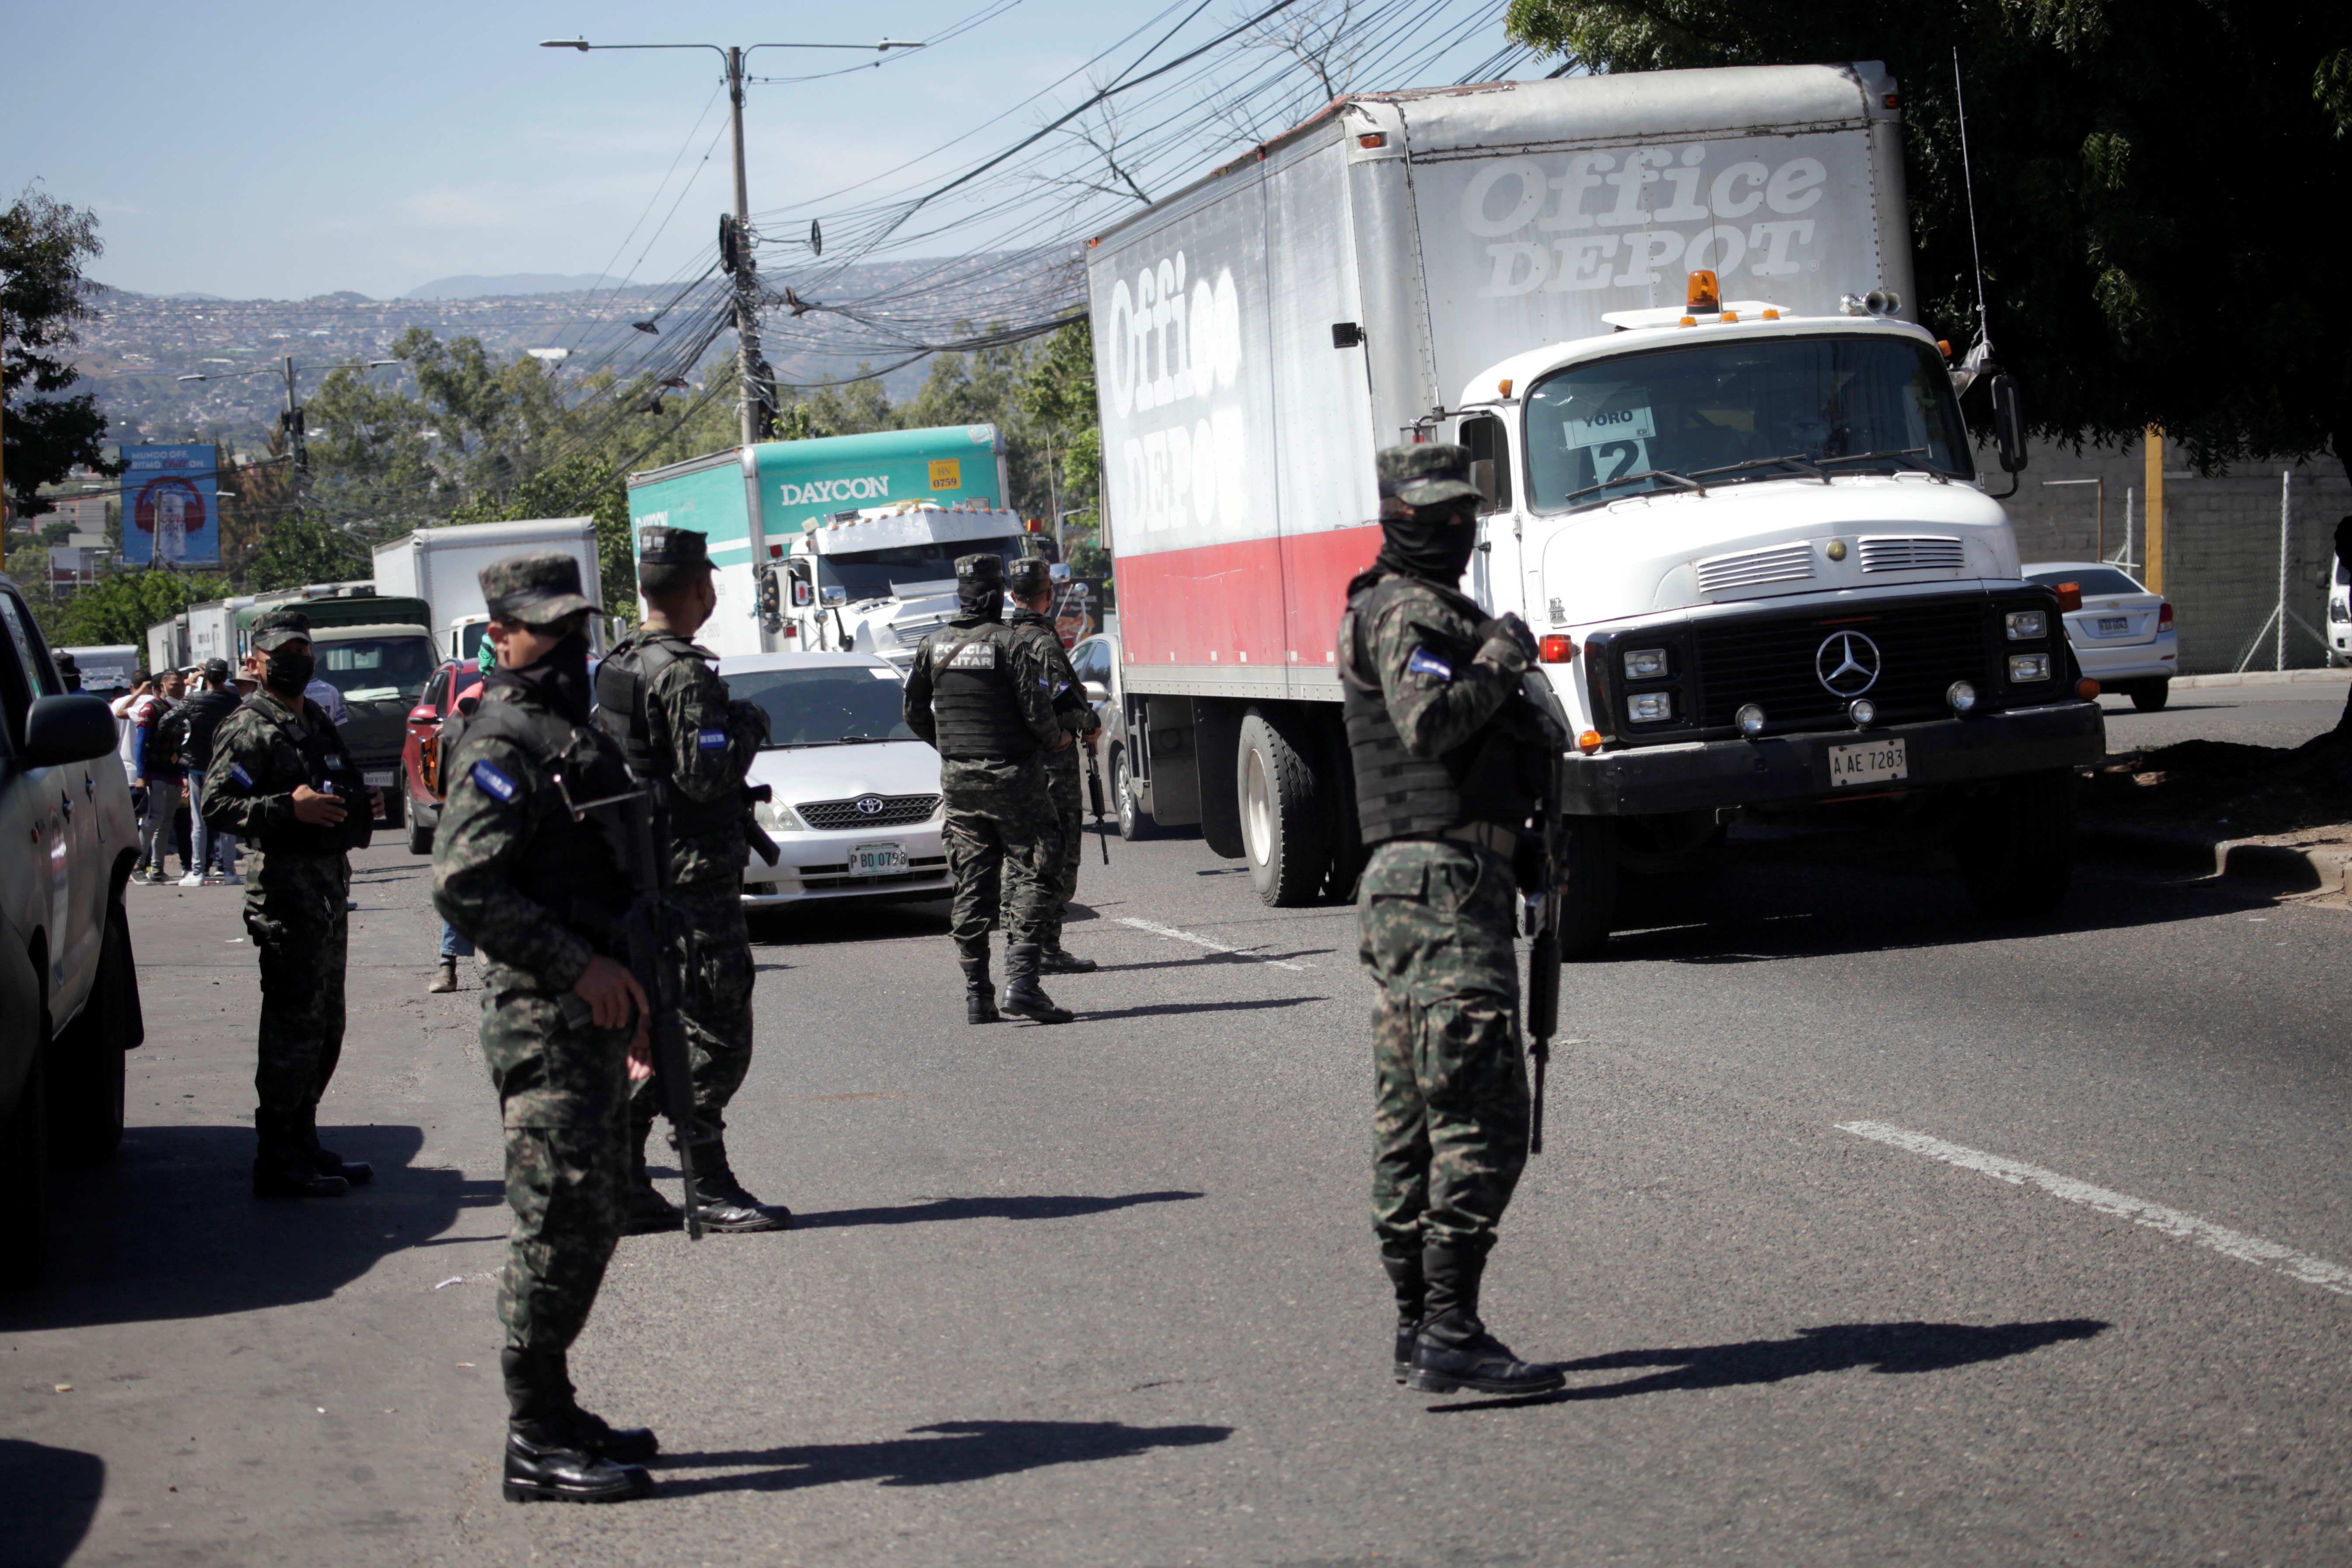 Soldiers control traffic as trucks queue to enter the warehouse where electoral materials are stored, following Sunday's general election in Tegucigalpa, Honduras November 30, 2021. REUTERS/Fredy Rodriguez